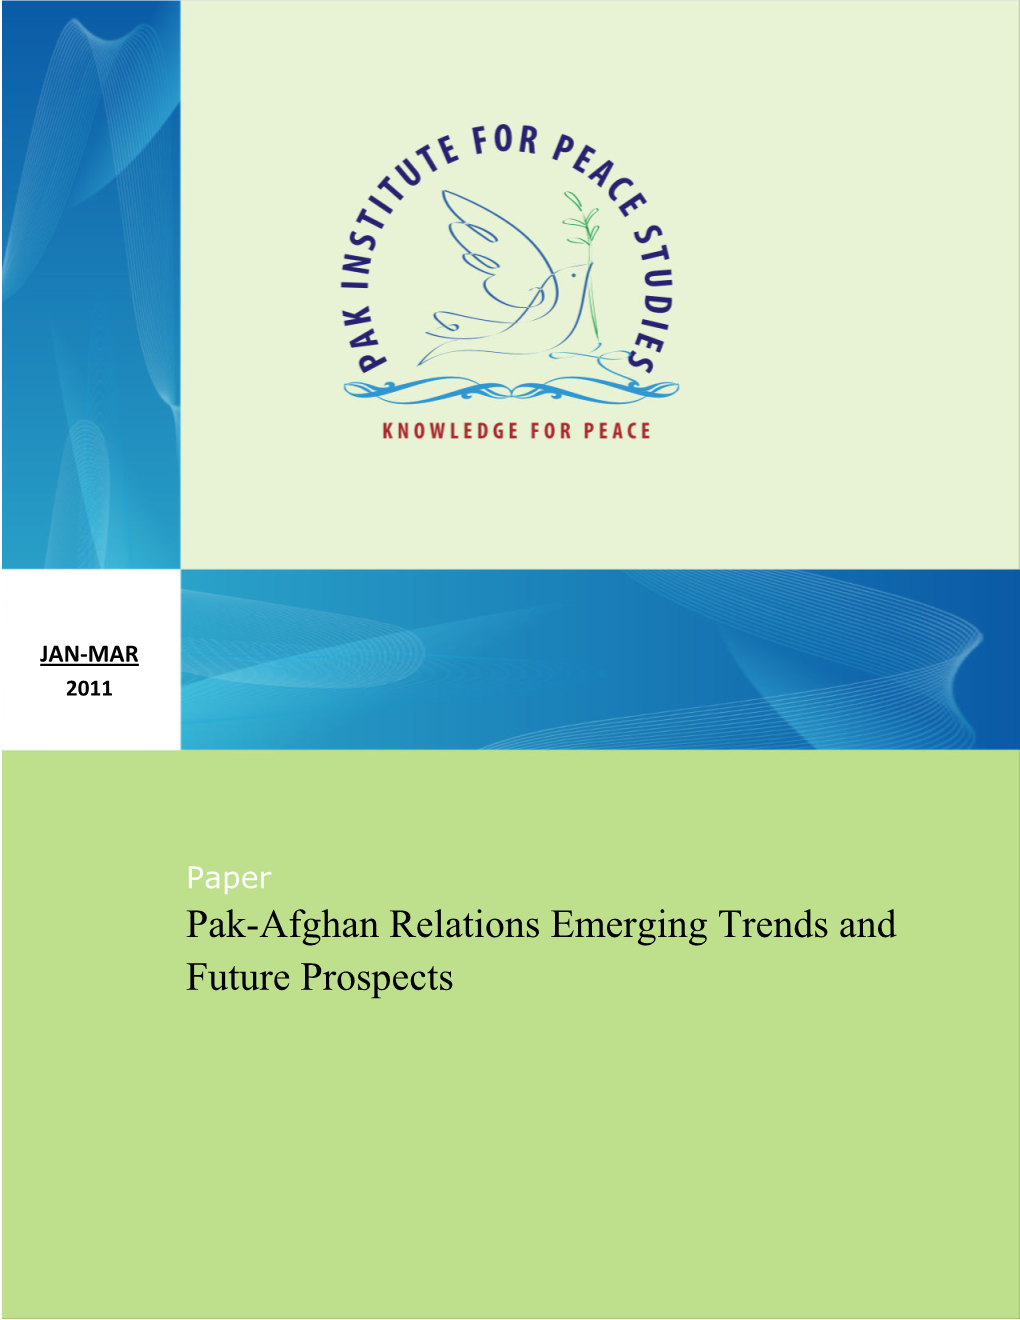 Pak-Afghan Relations Emerging Trends and Future Prospects